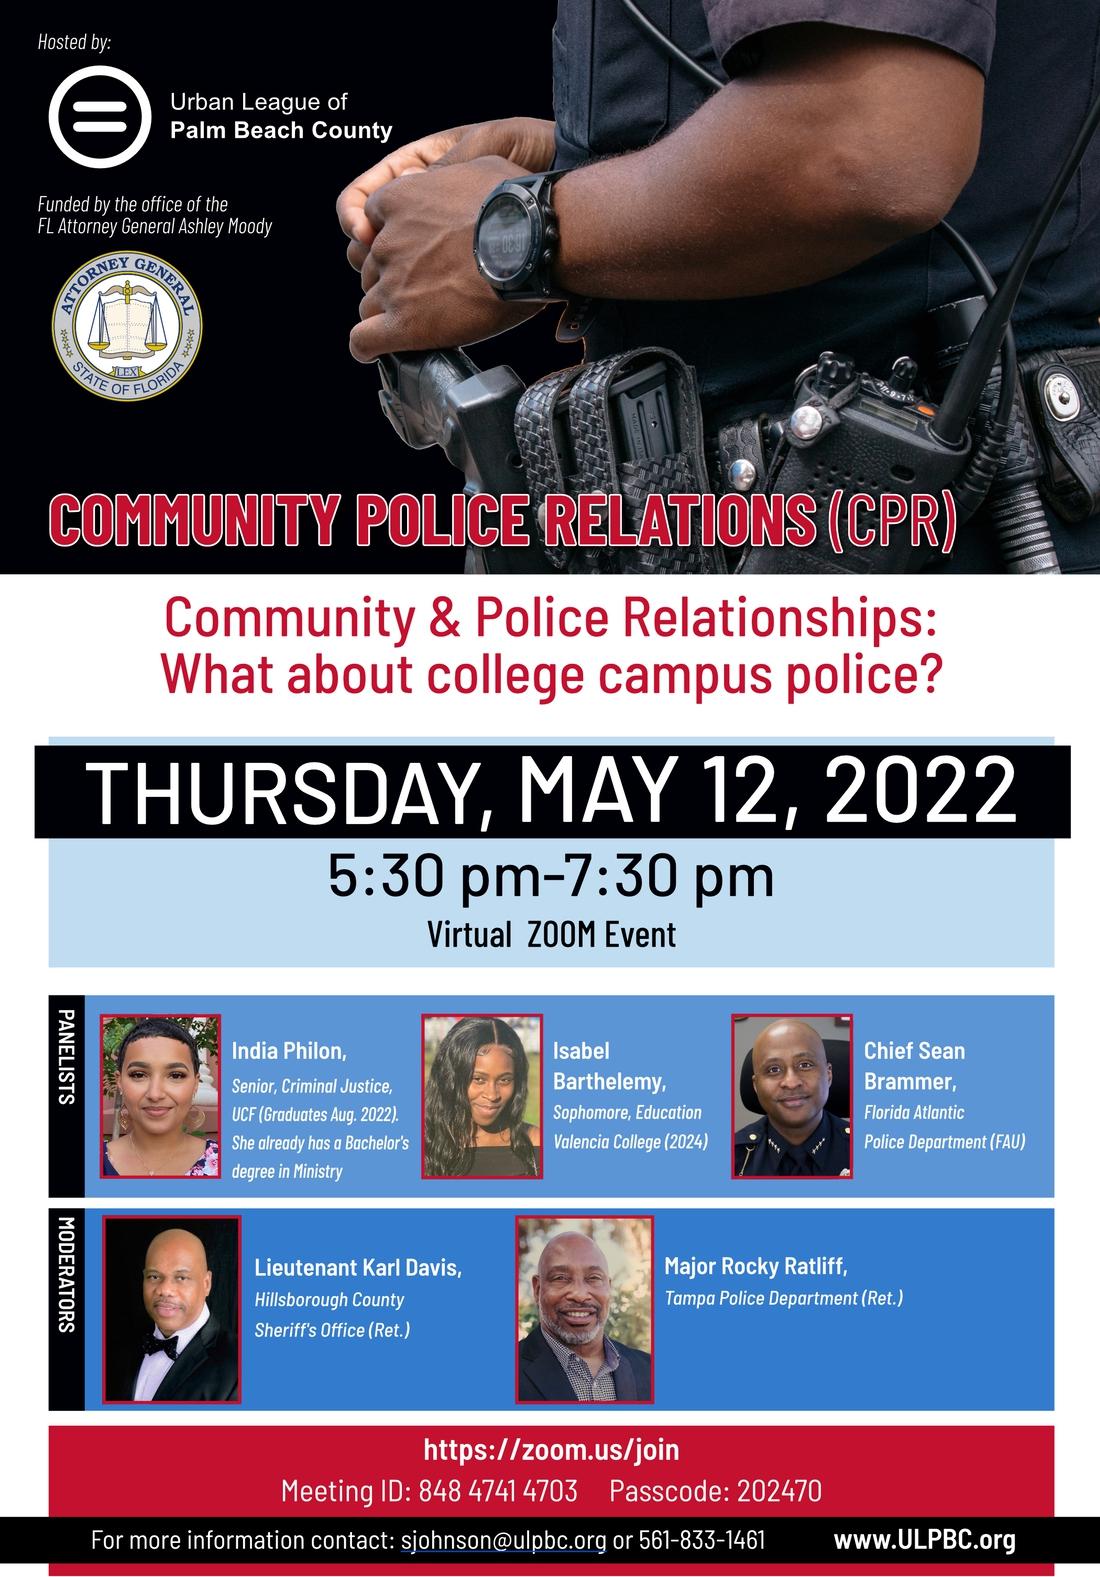 Community & Police Relations